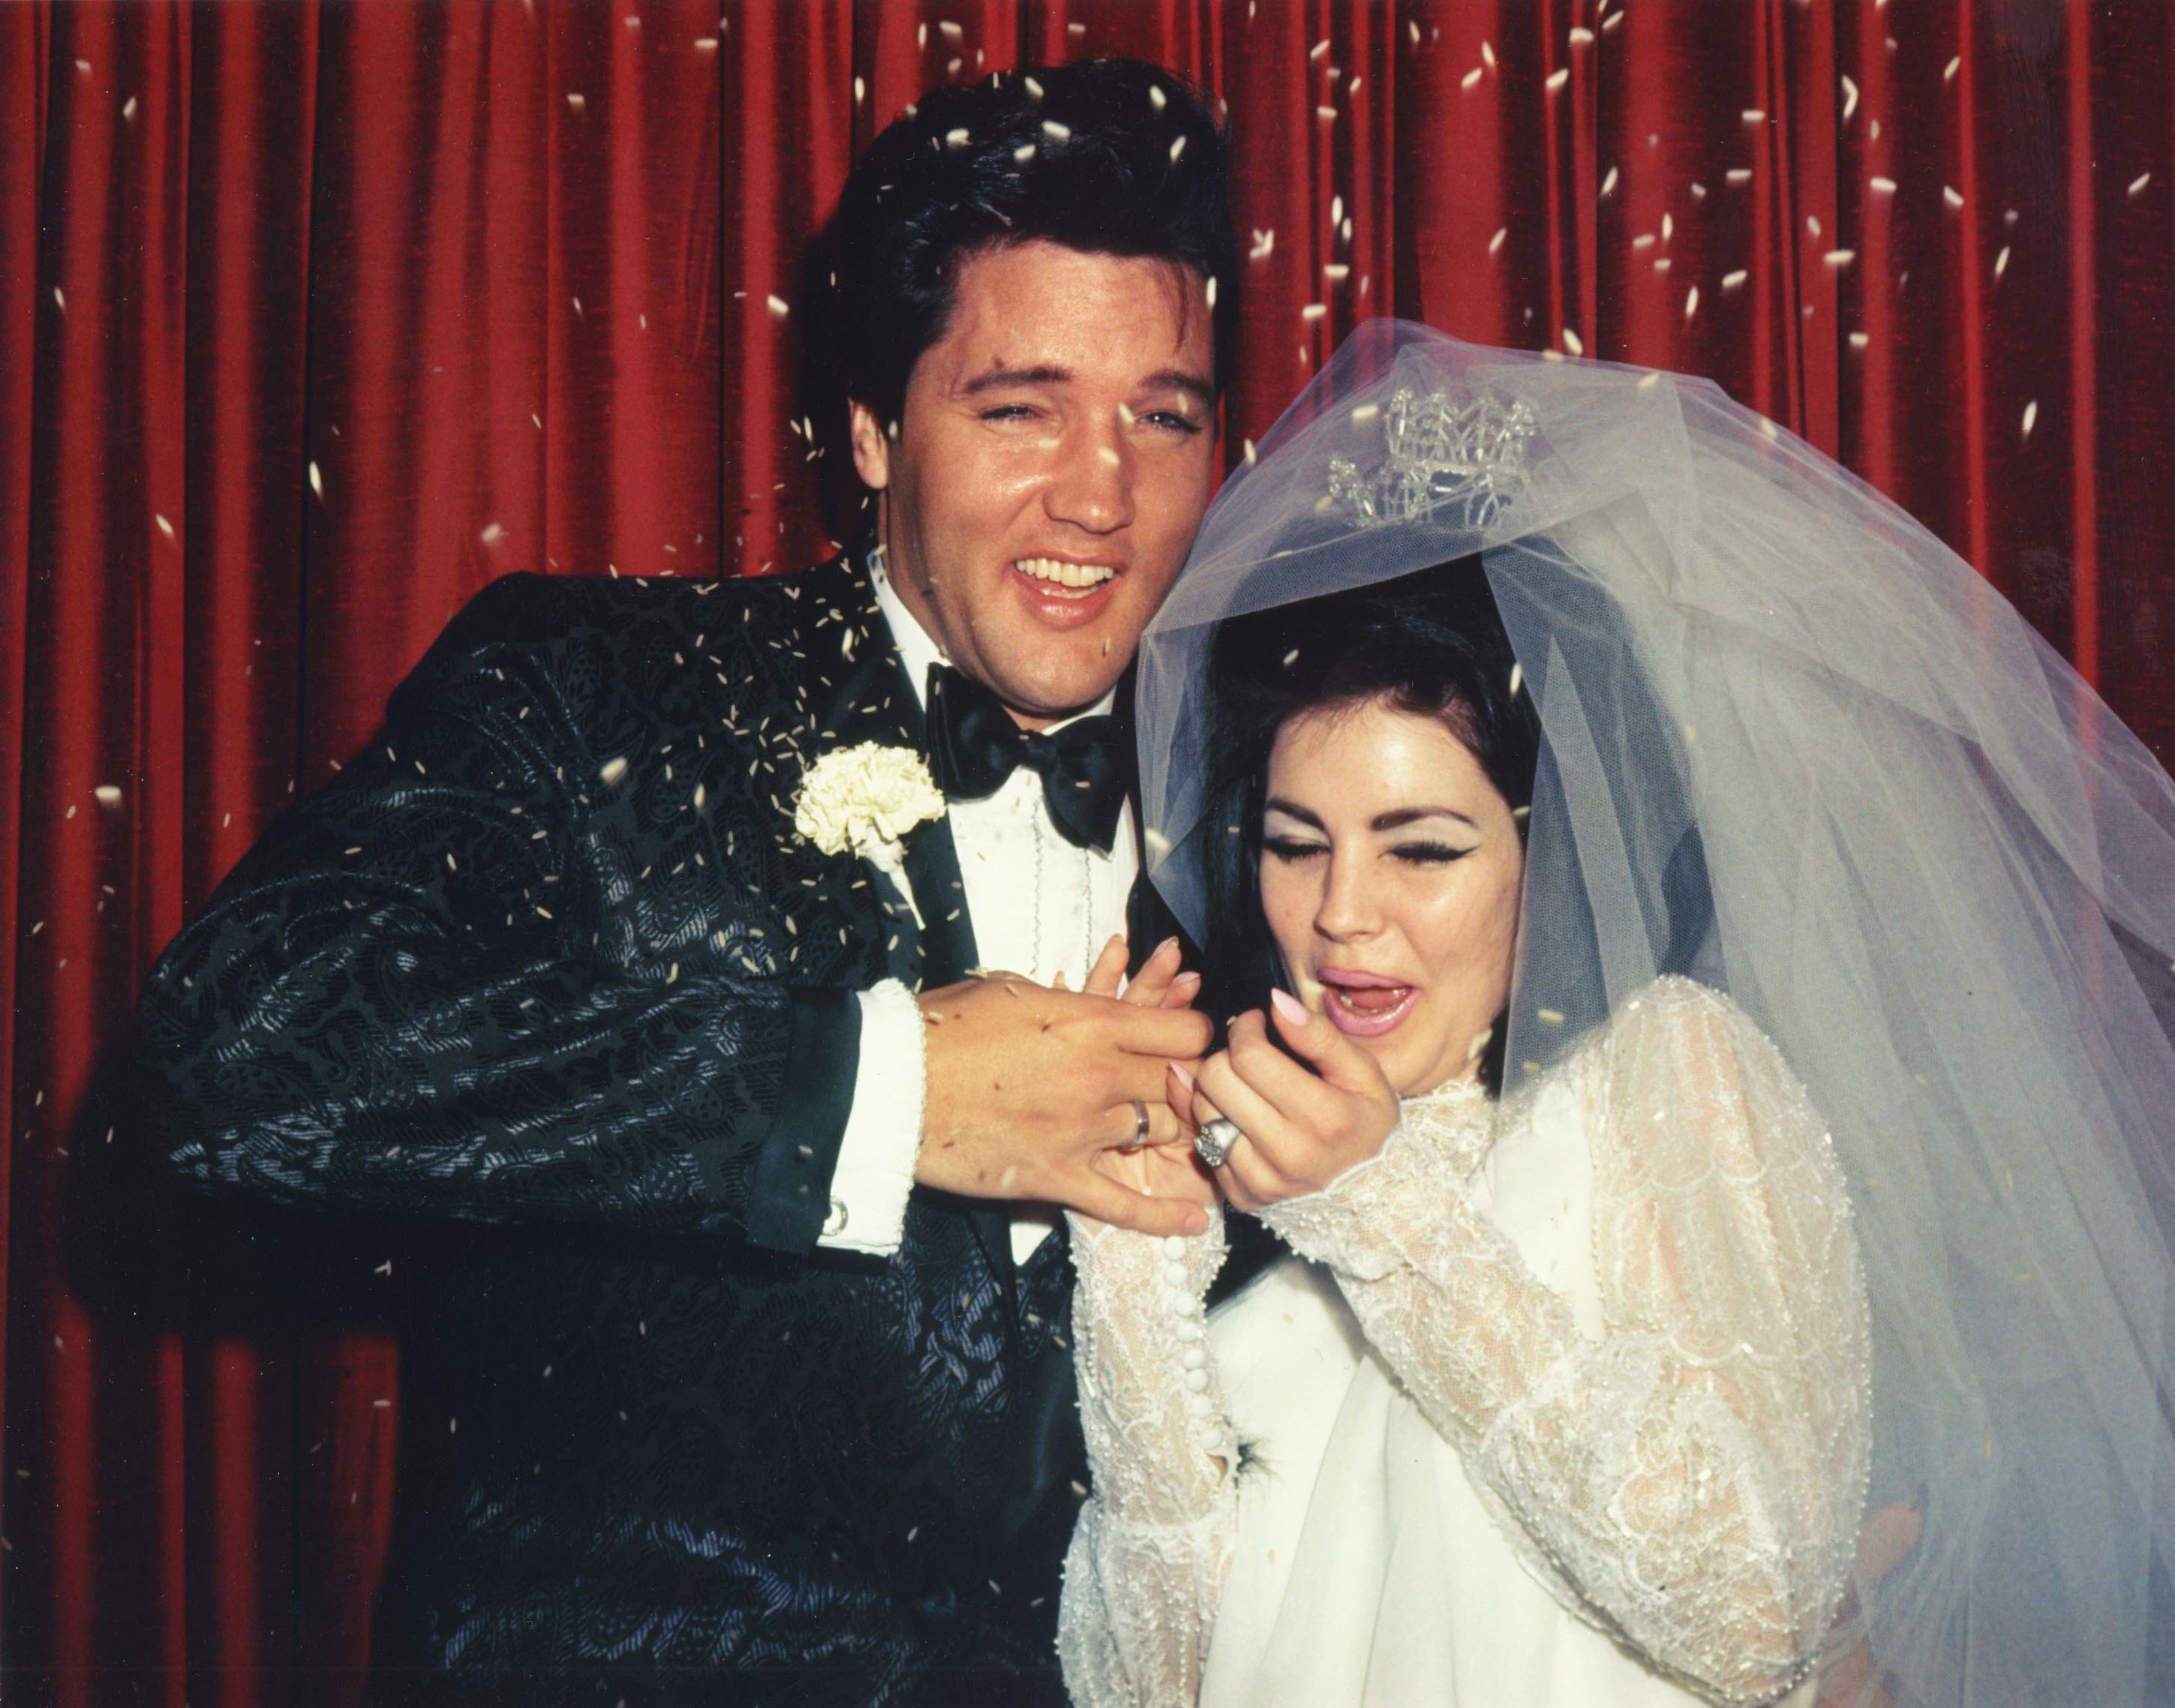 Elvis and Priscilla Presley on their wedding day in 1967 | Source: Getty Images